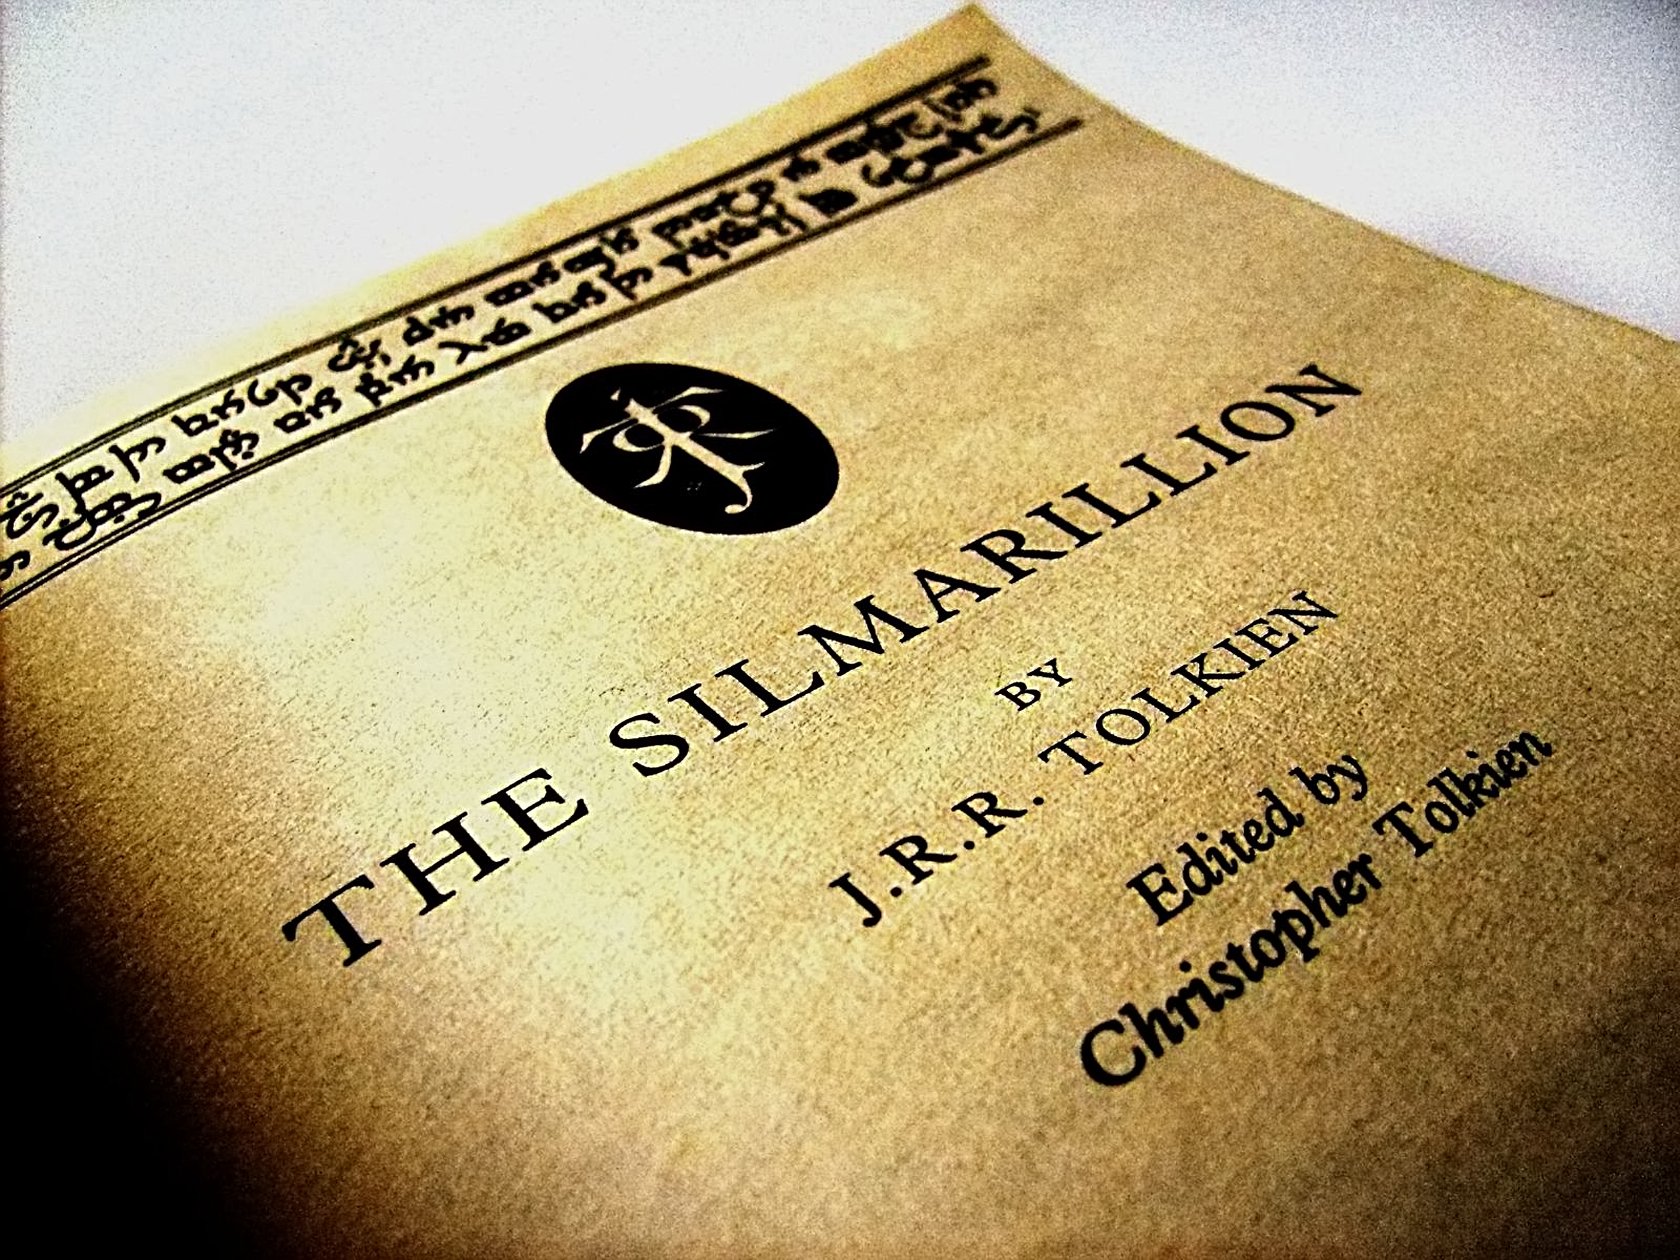 The title page, of the book "The Silmarillion" by J.R.R. Tolkien, edited and published by his son Christopher Tolkien. shared on April 2008 | Photo: Wikimedia